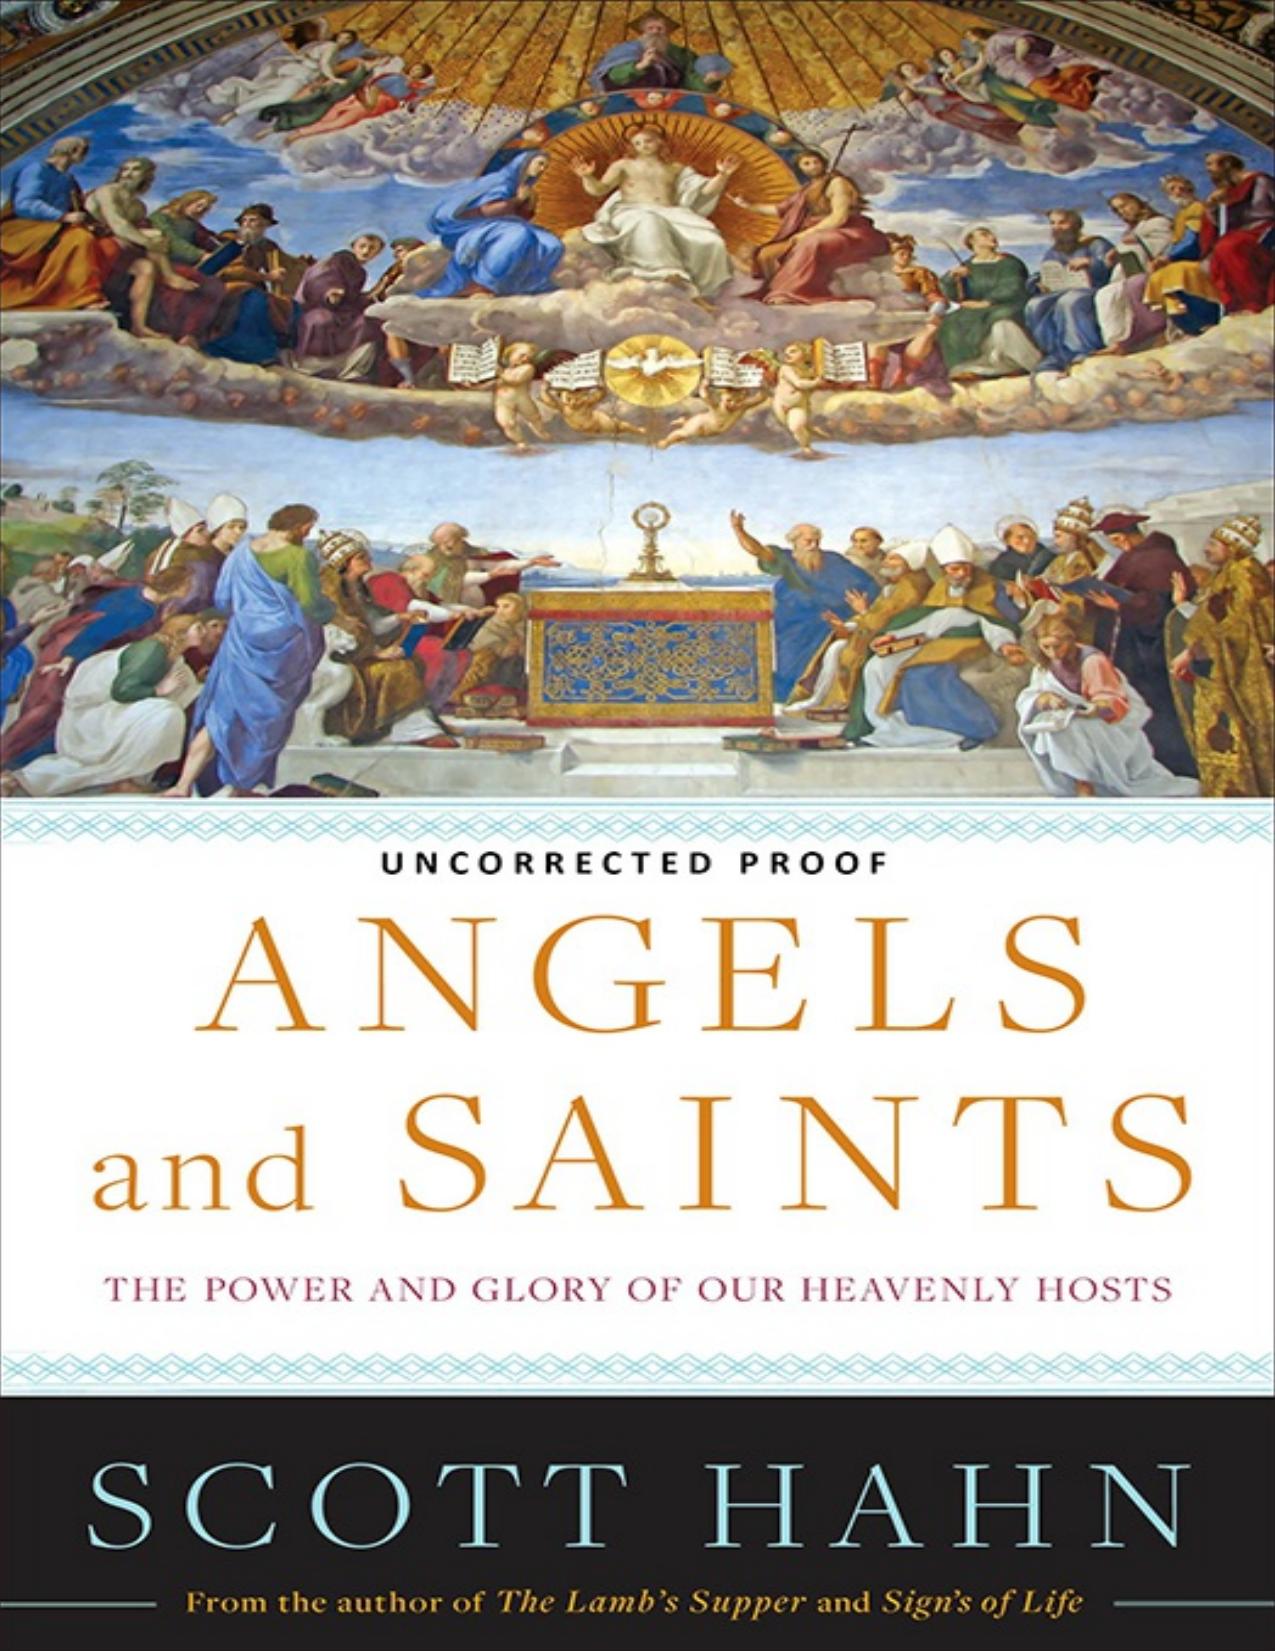 Angels and Saints by Scott Hahn